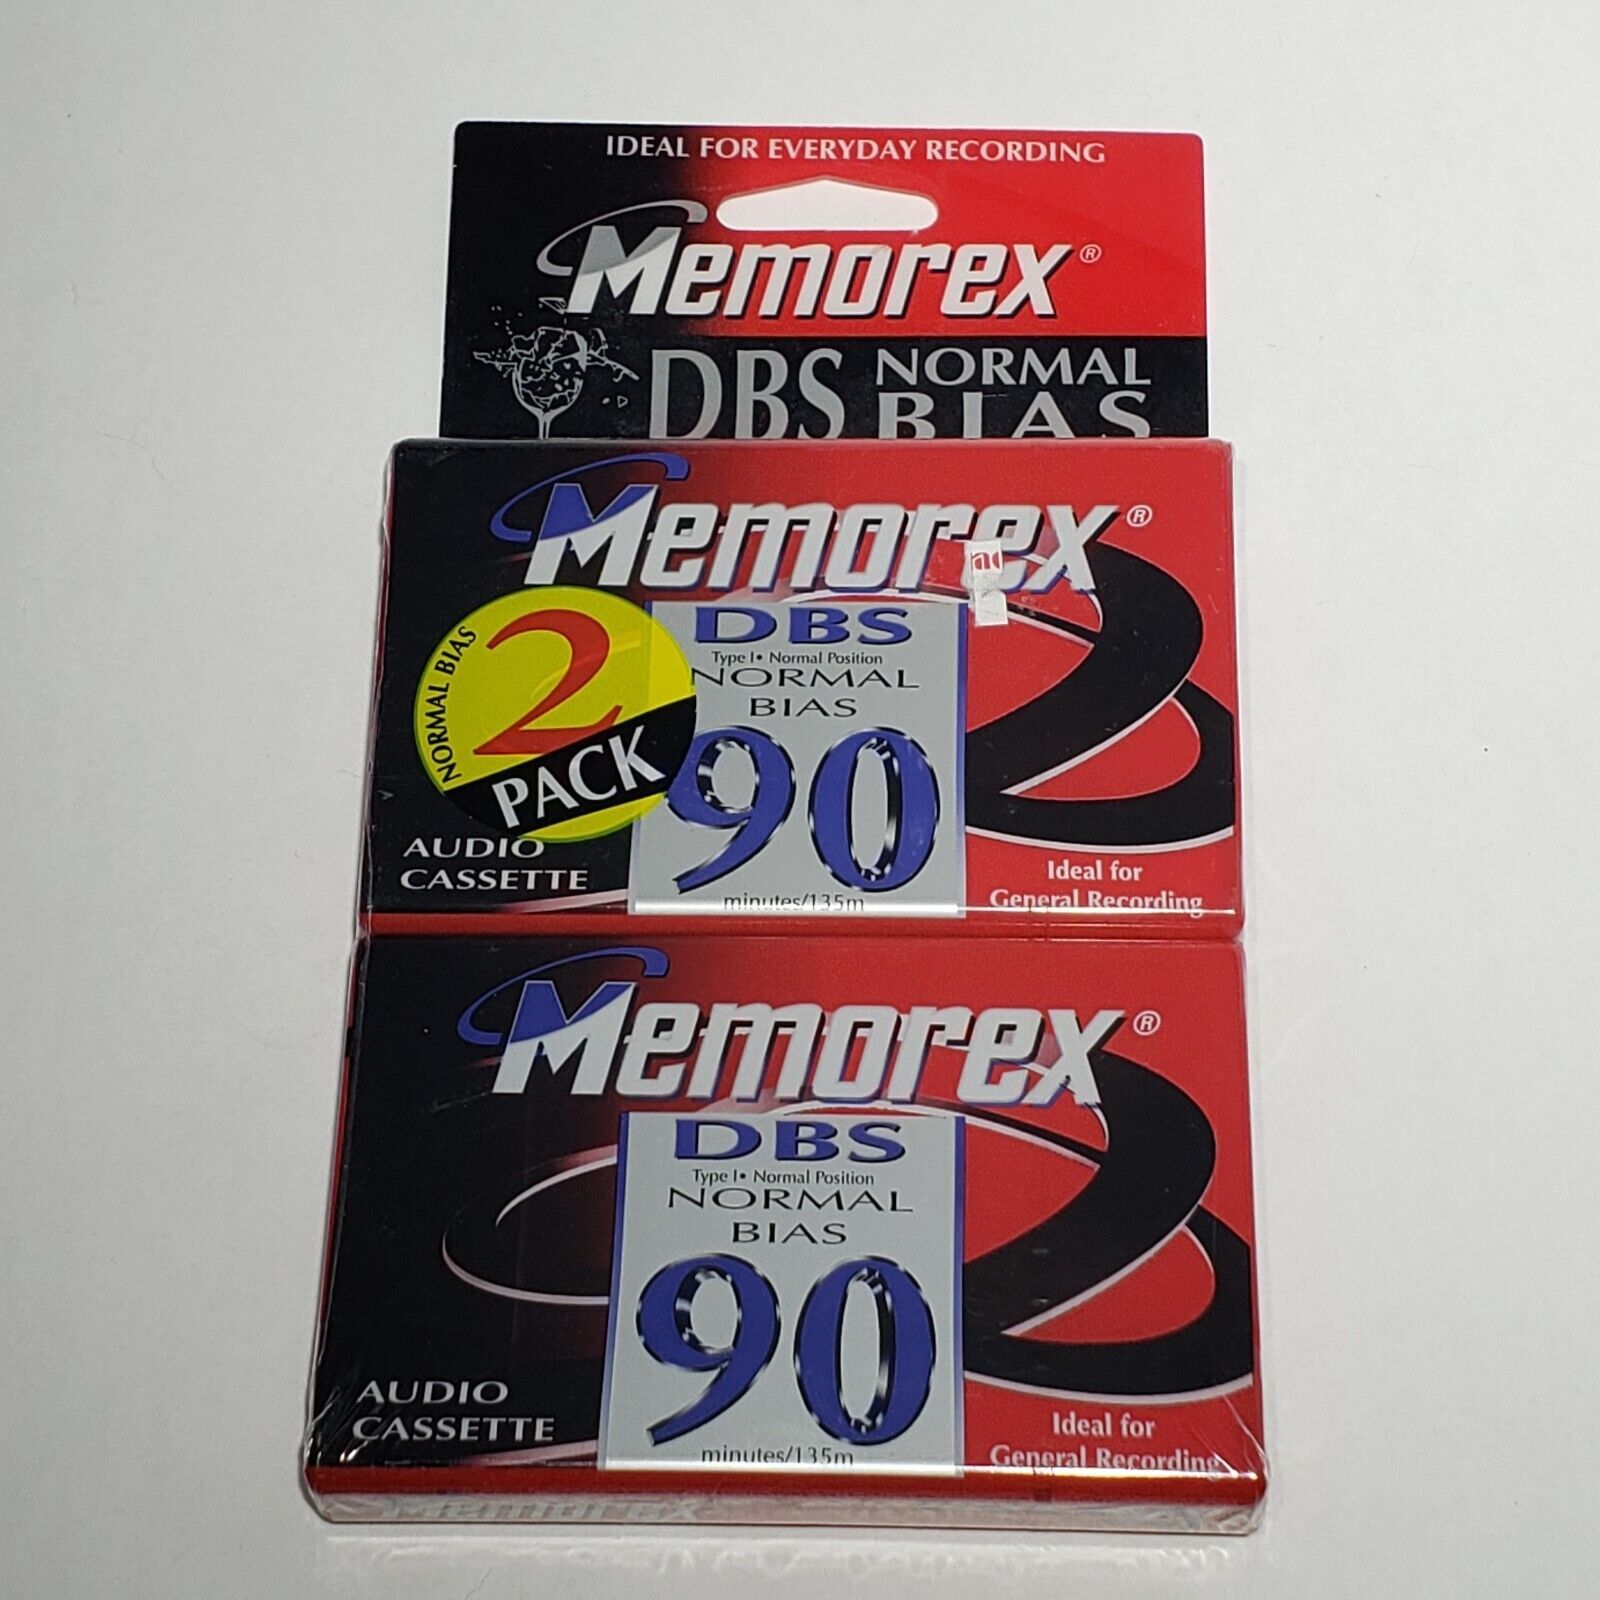 Primary image for Memorex 2 Pack DBS 90 Blank Audio Cassette Tapes Normal Bias New Sealed